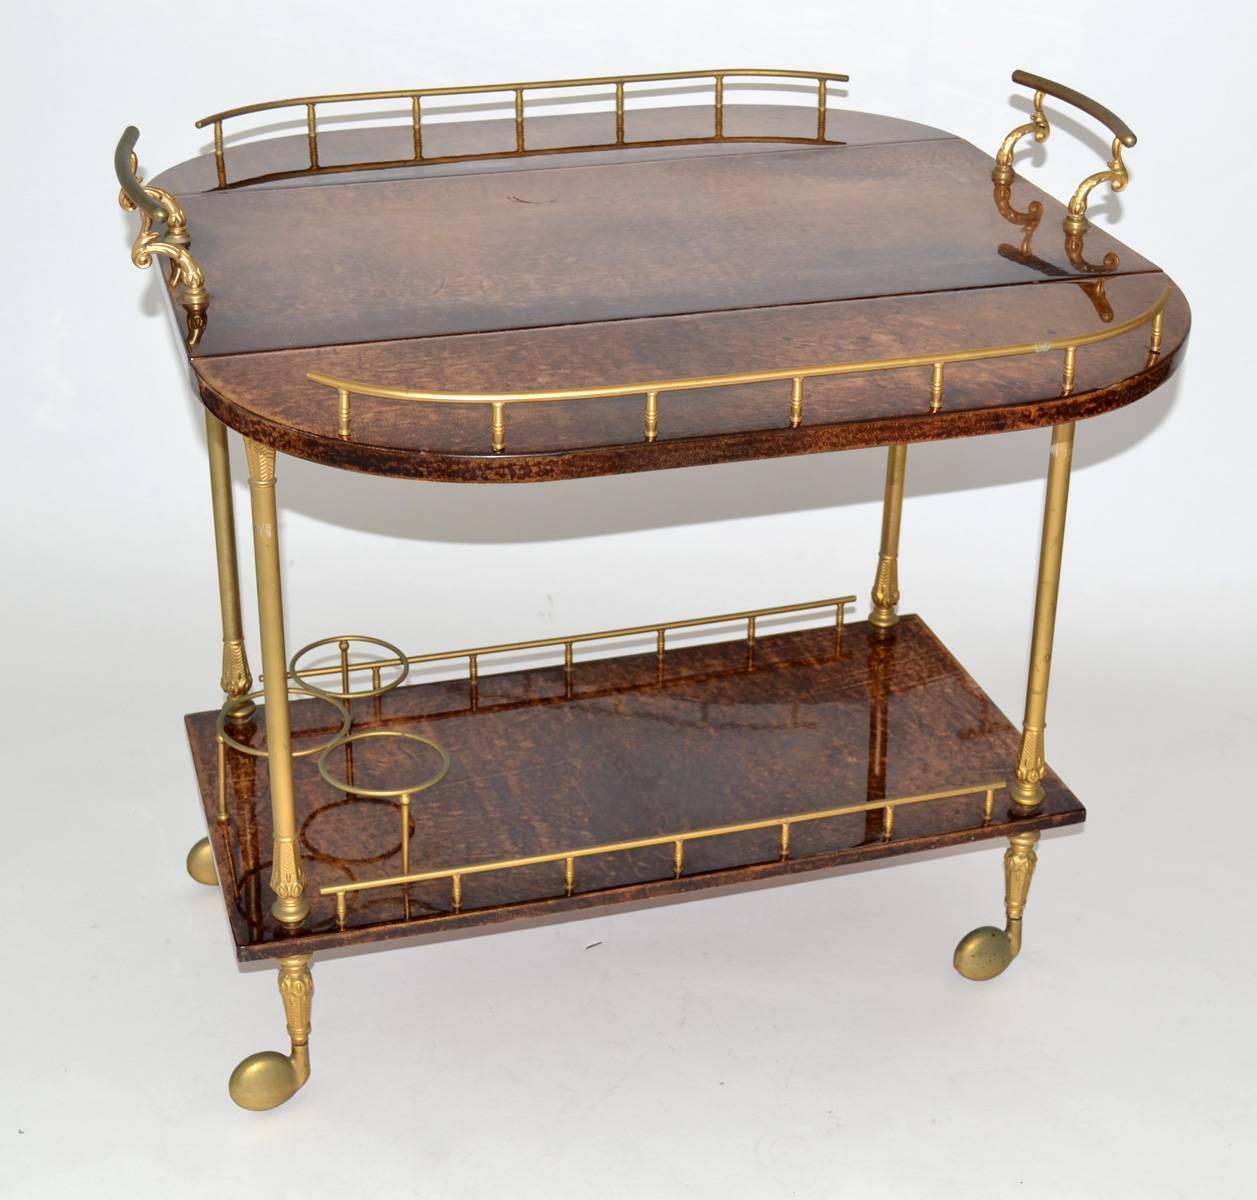 Aldo Tura goatskin drop-leaf bar or tea cart in chocolate brown parchment with brass hardware. Small wheeled version. Professional repair to bottom shelf